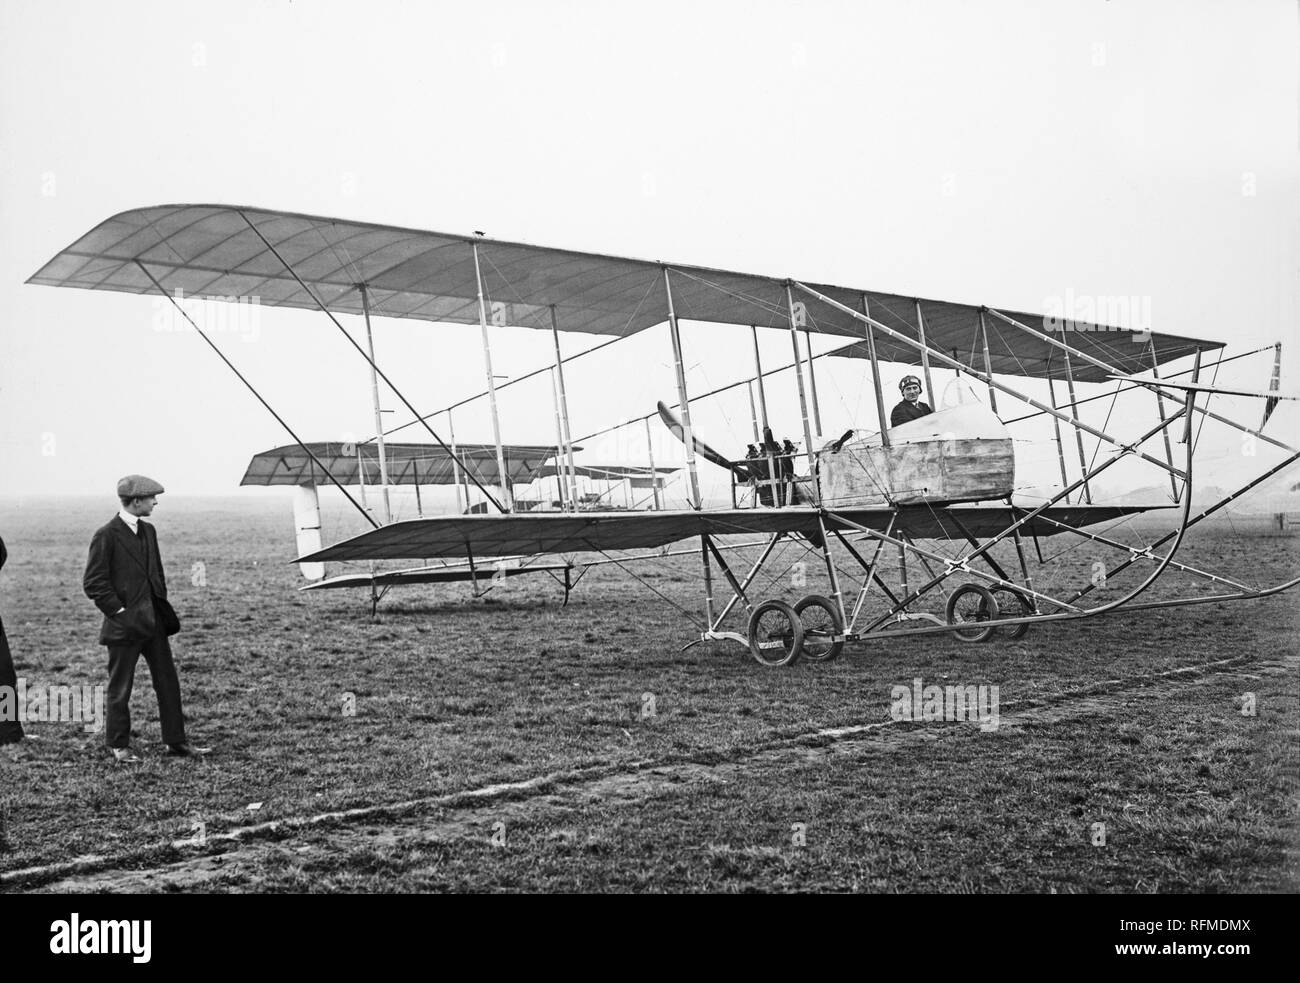 A Maurice Farman Biplane, piloted by Louis Noel, an early French aviator, preparing to take off. Photograph taken in England in 1913. Stock Photo